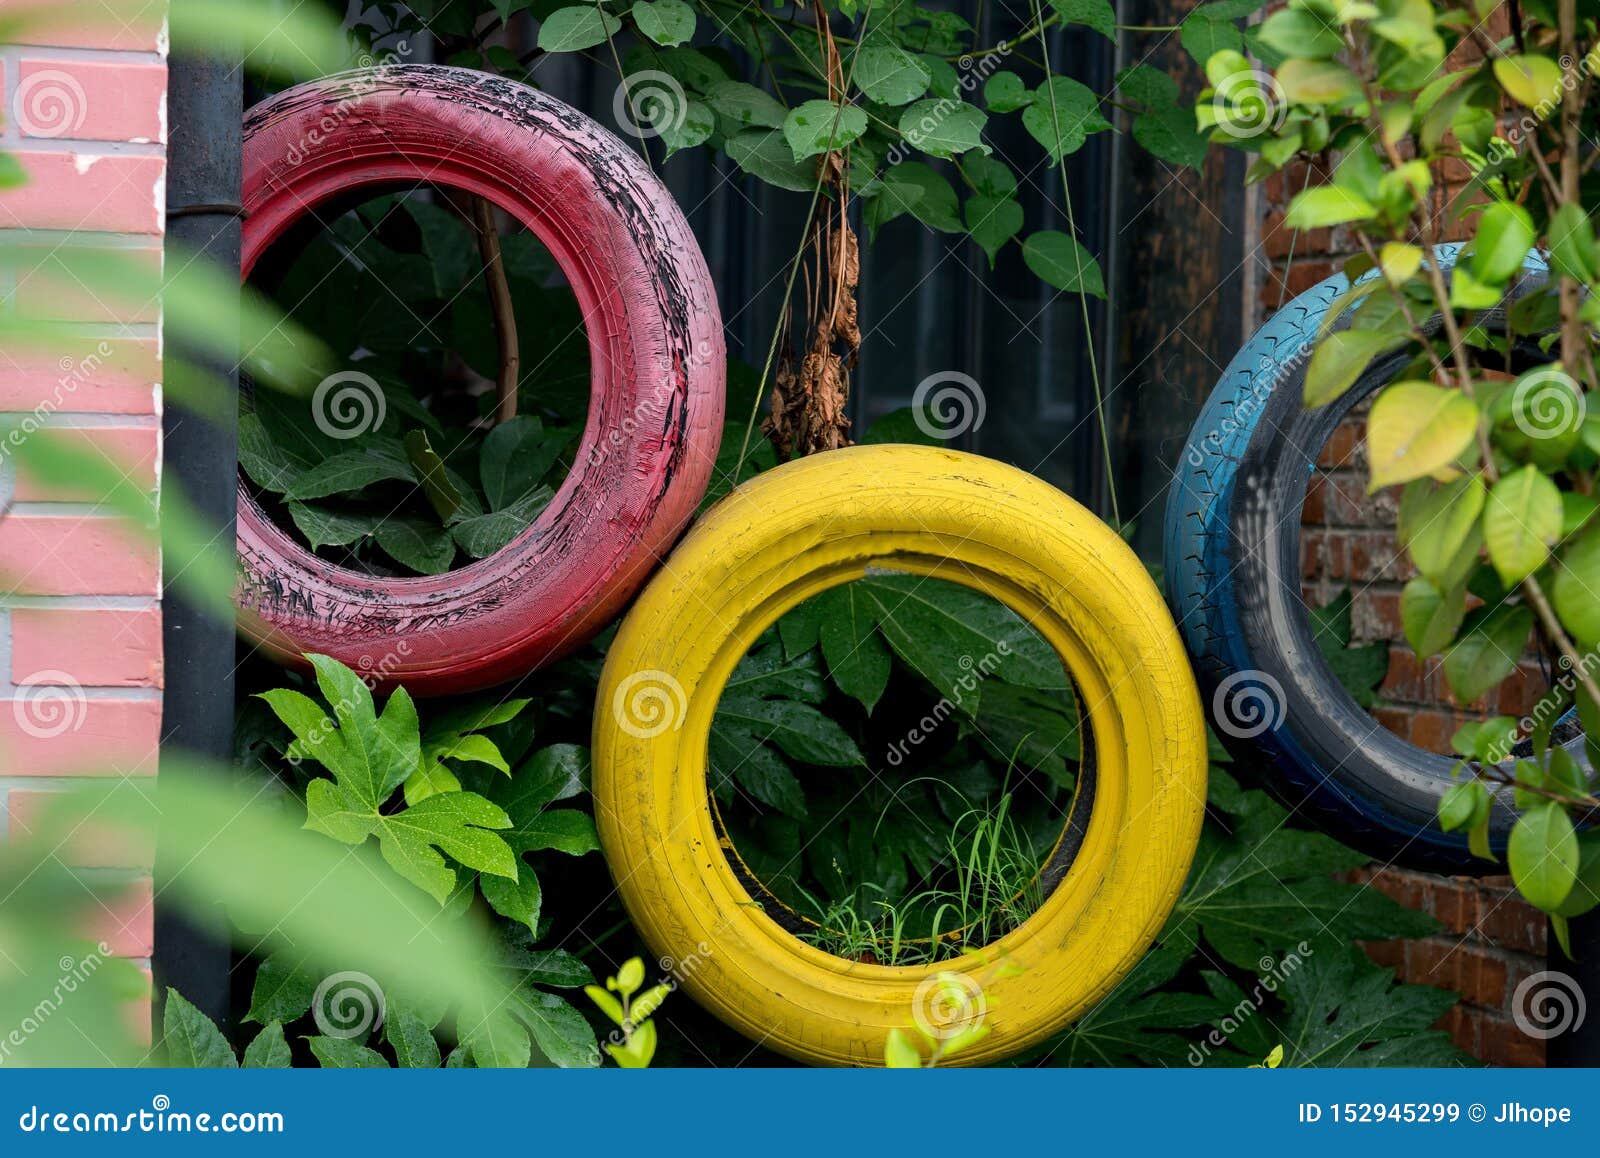 colorful tyres decorations